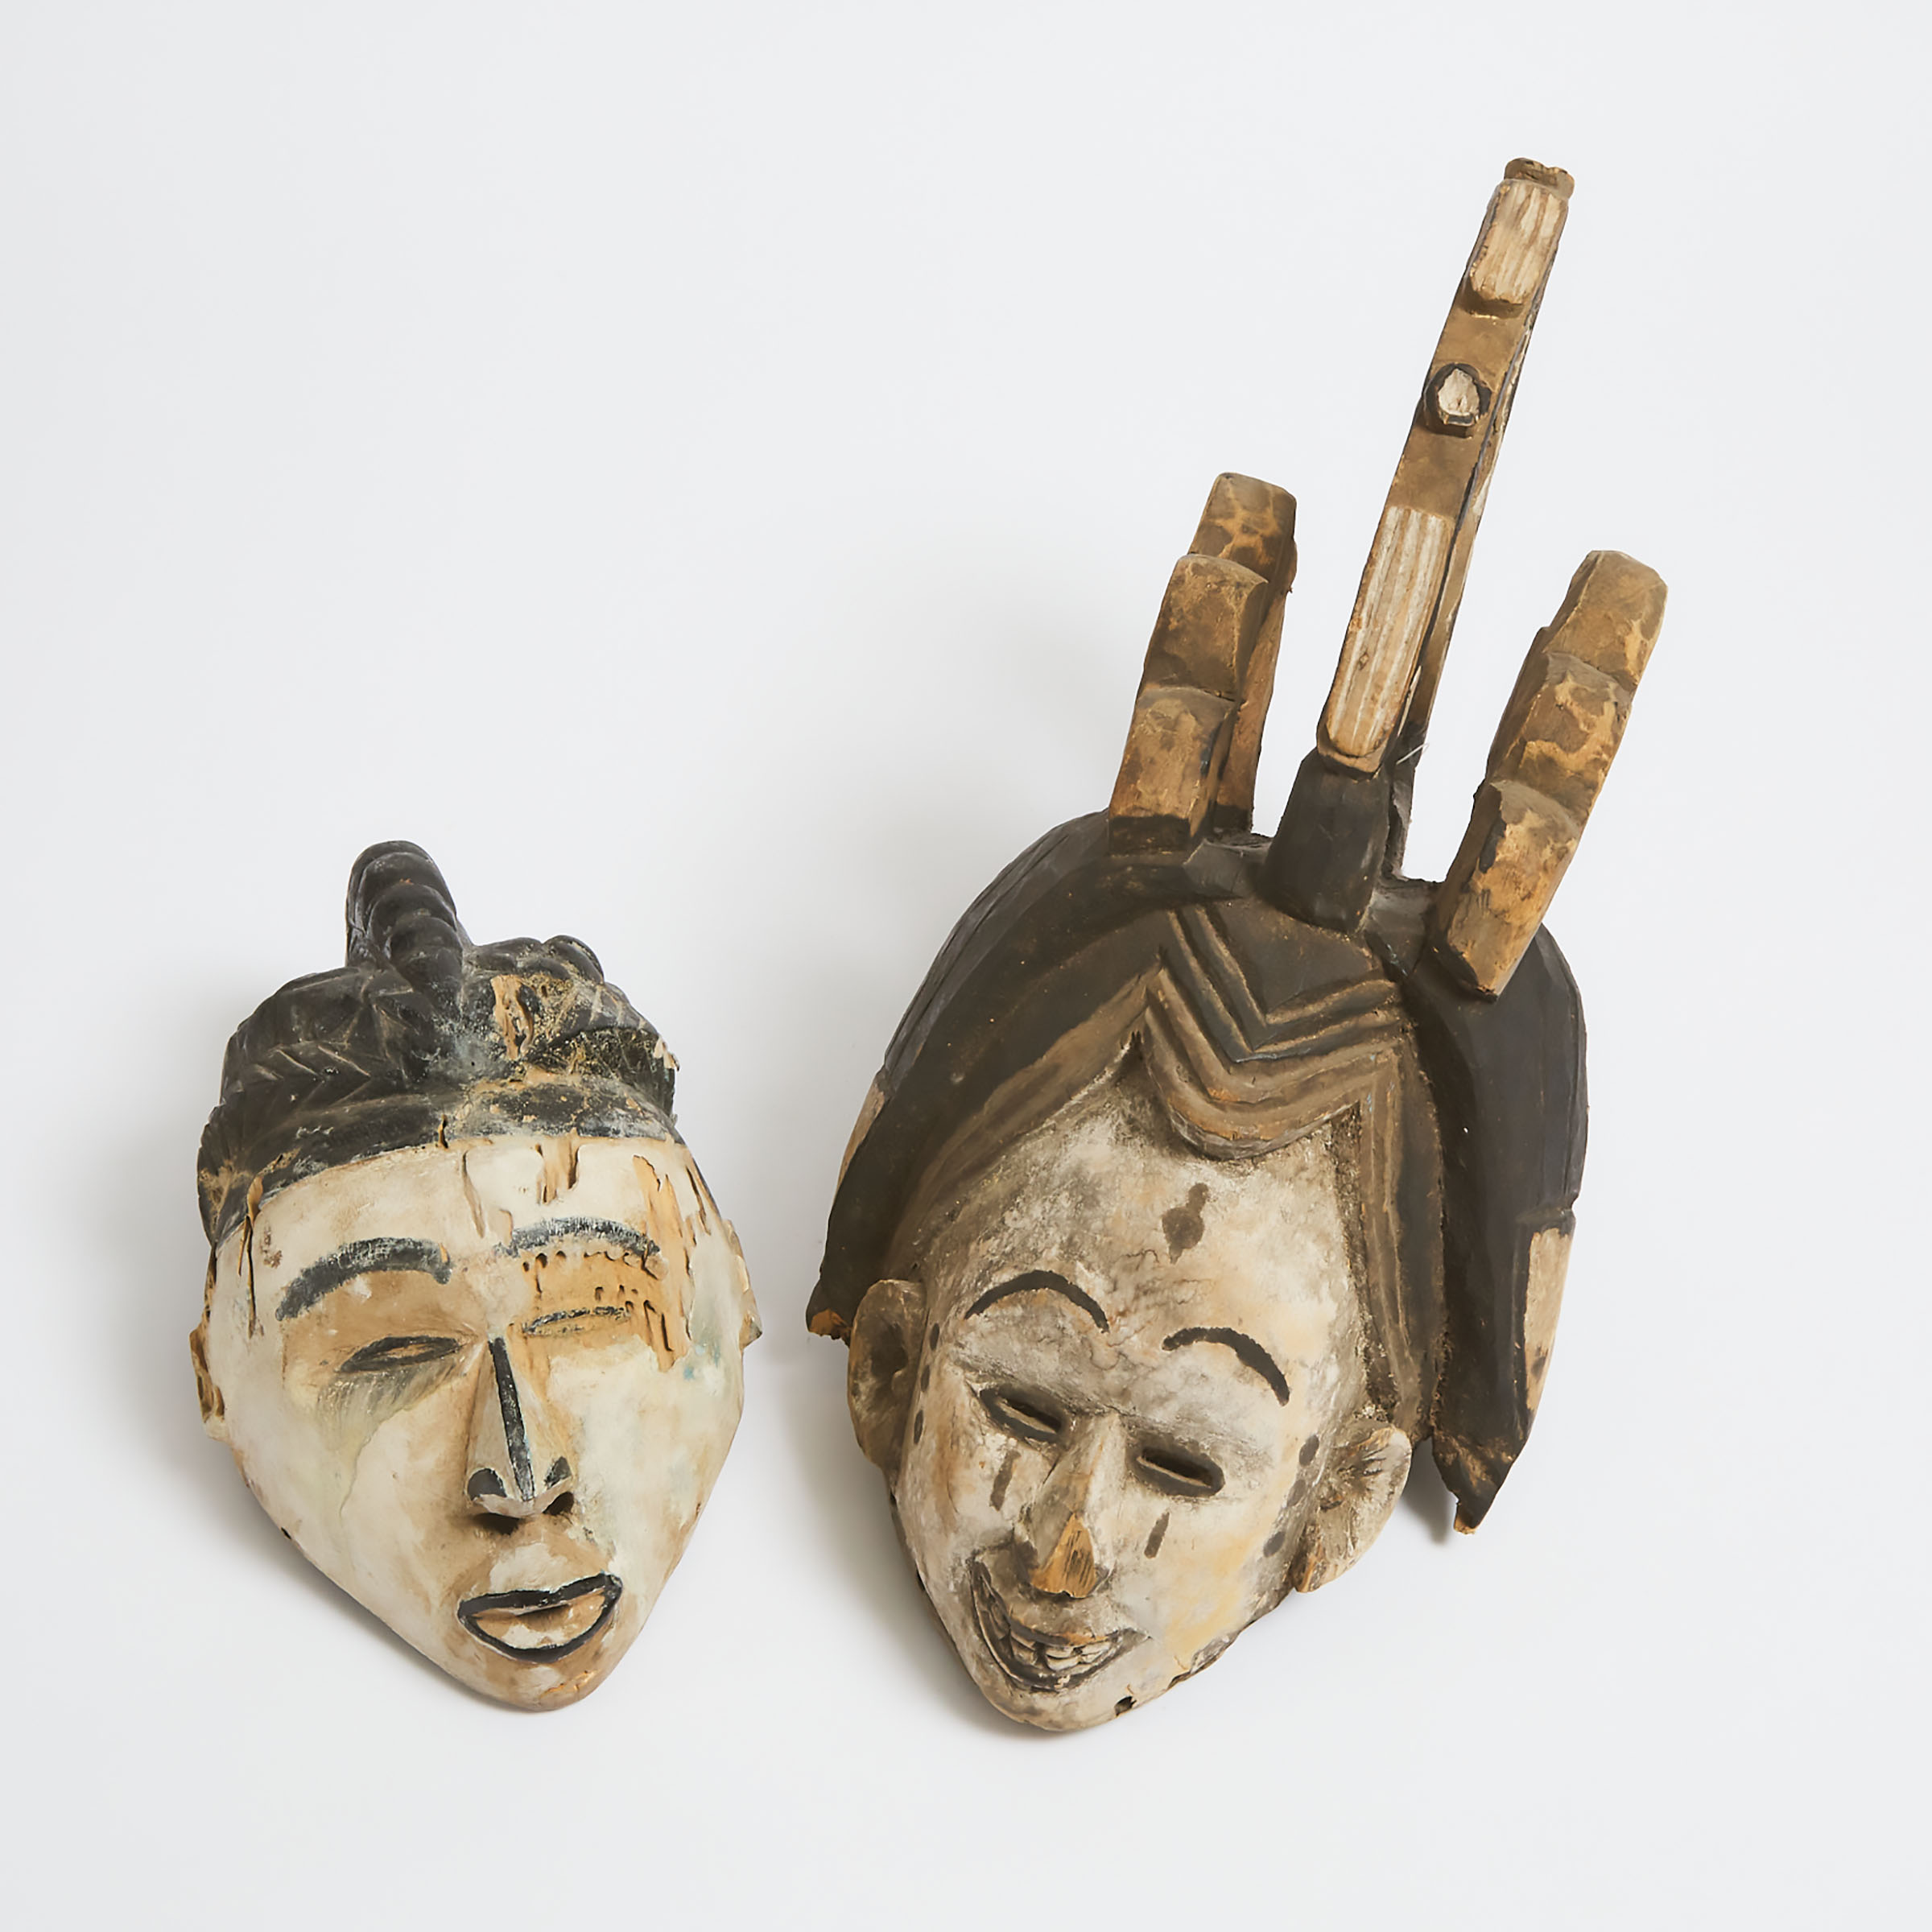 Two Igbo Helmet Masks, West Africa, early to mid 20th century